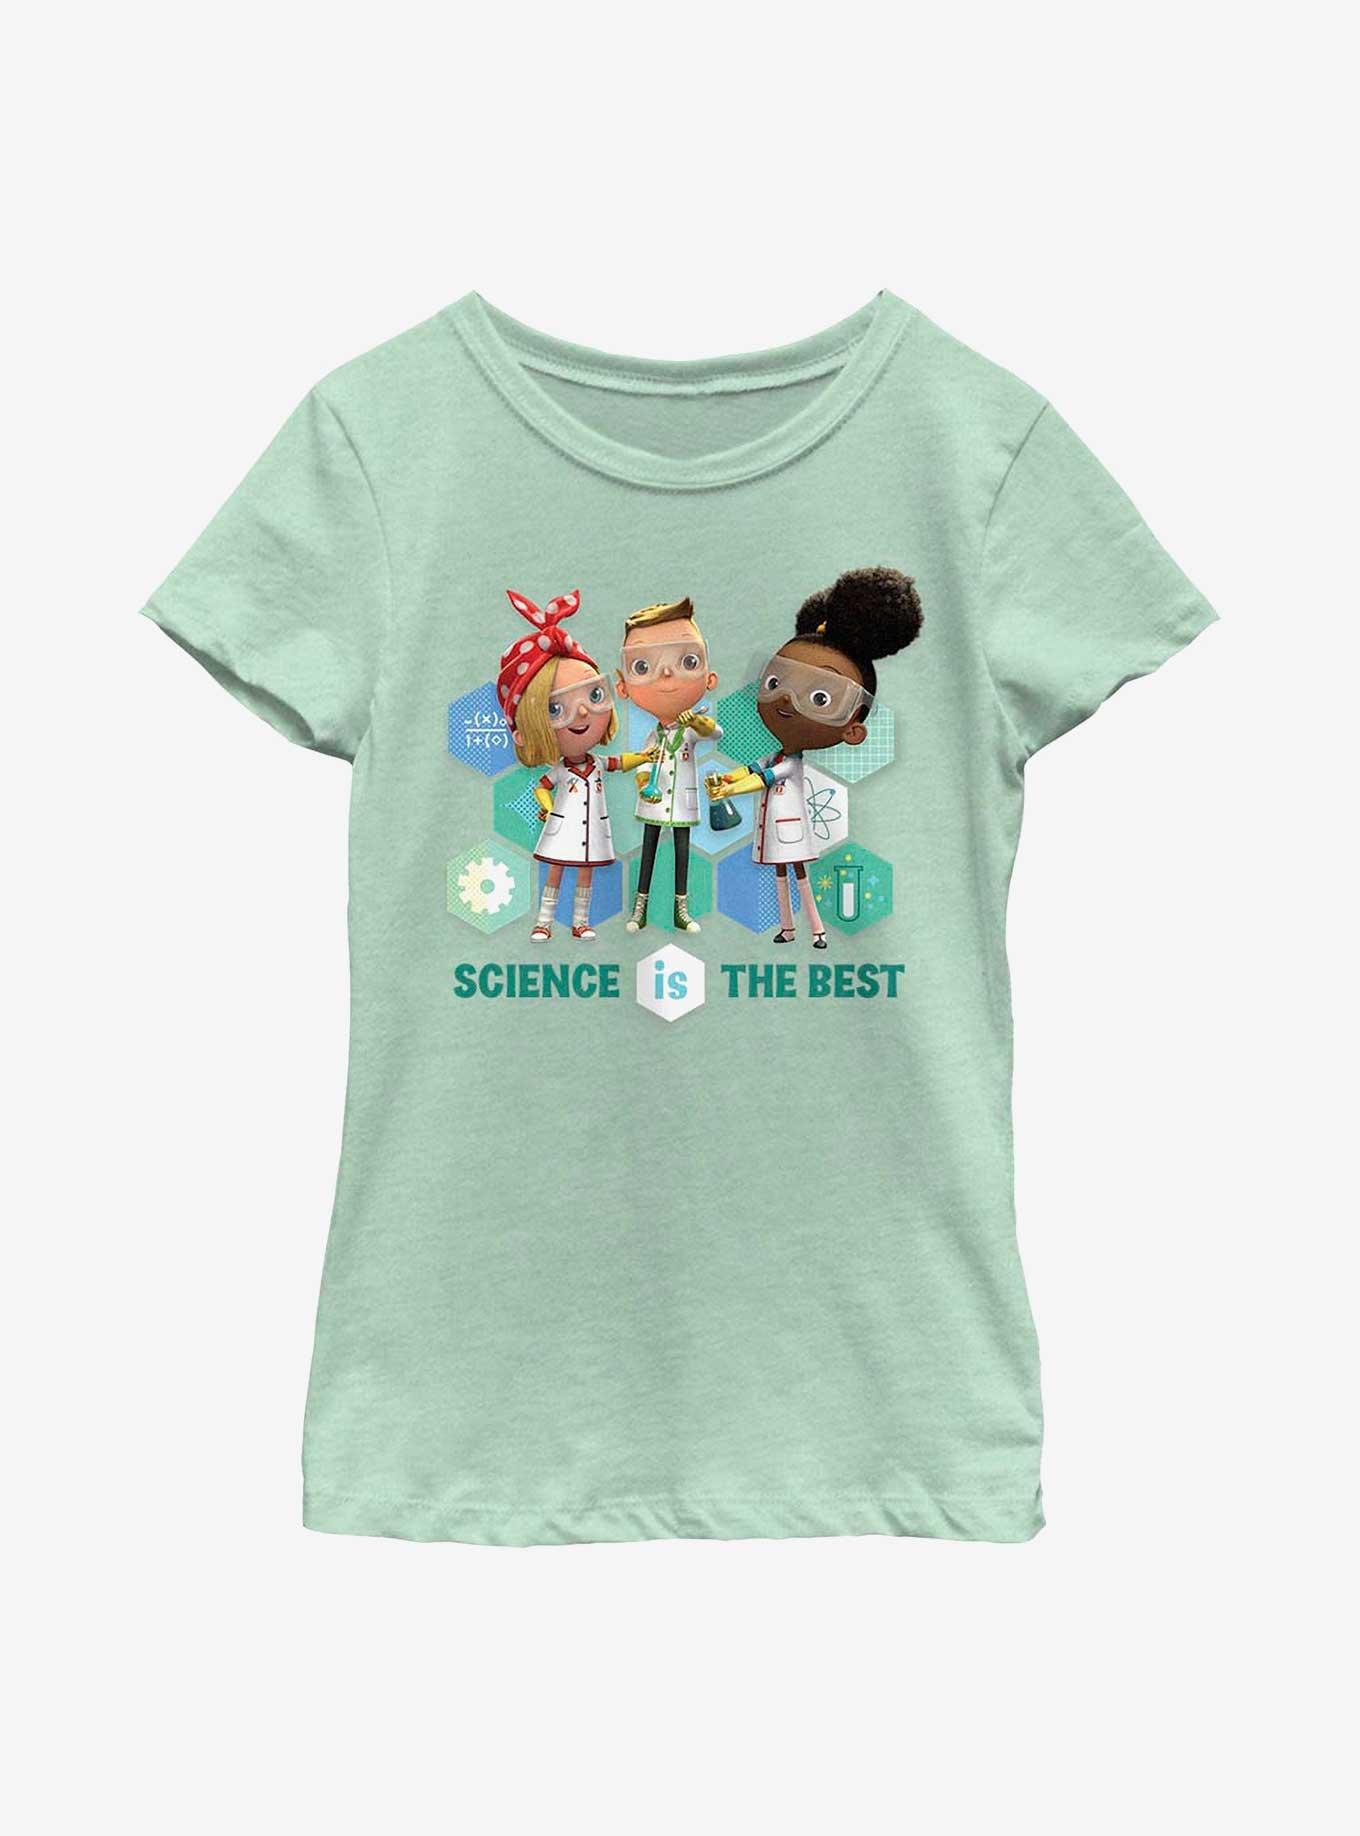 Ada Twist, Scientist Science Group Youth Girls T-Shirt, MINT, hi-res